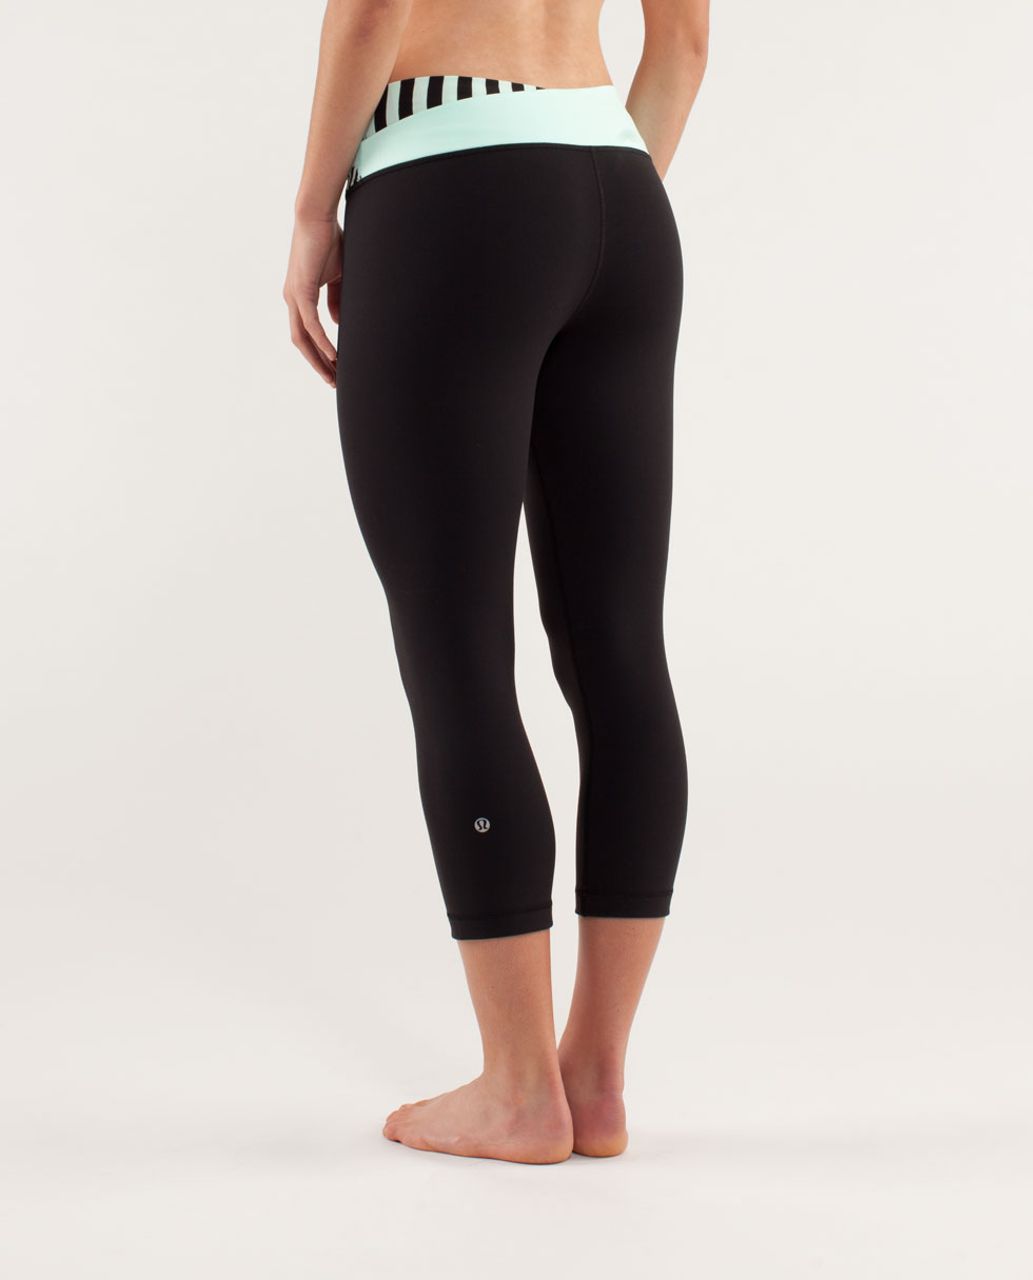 Women's YPB Studio and Go Cargo Jogger, Women's Clearance